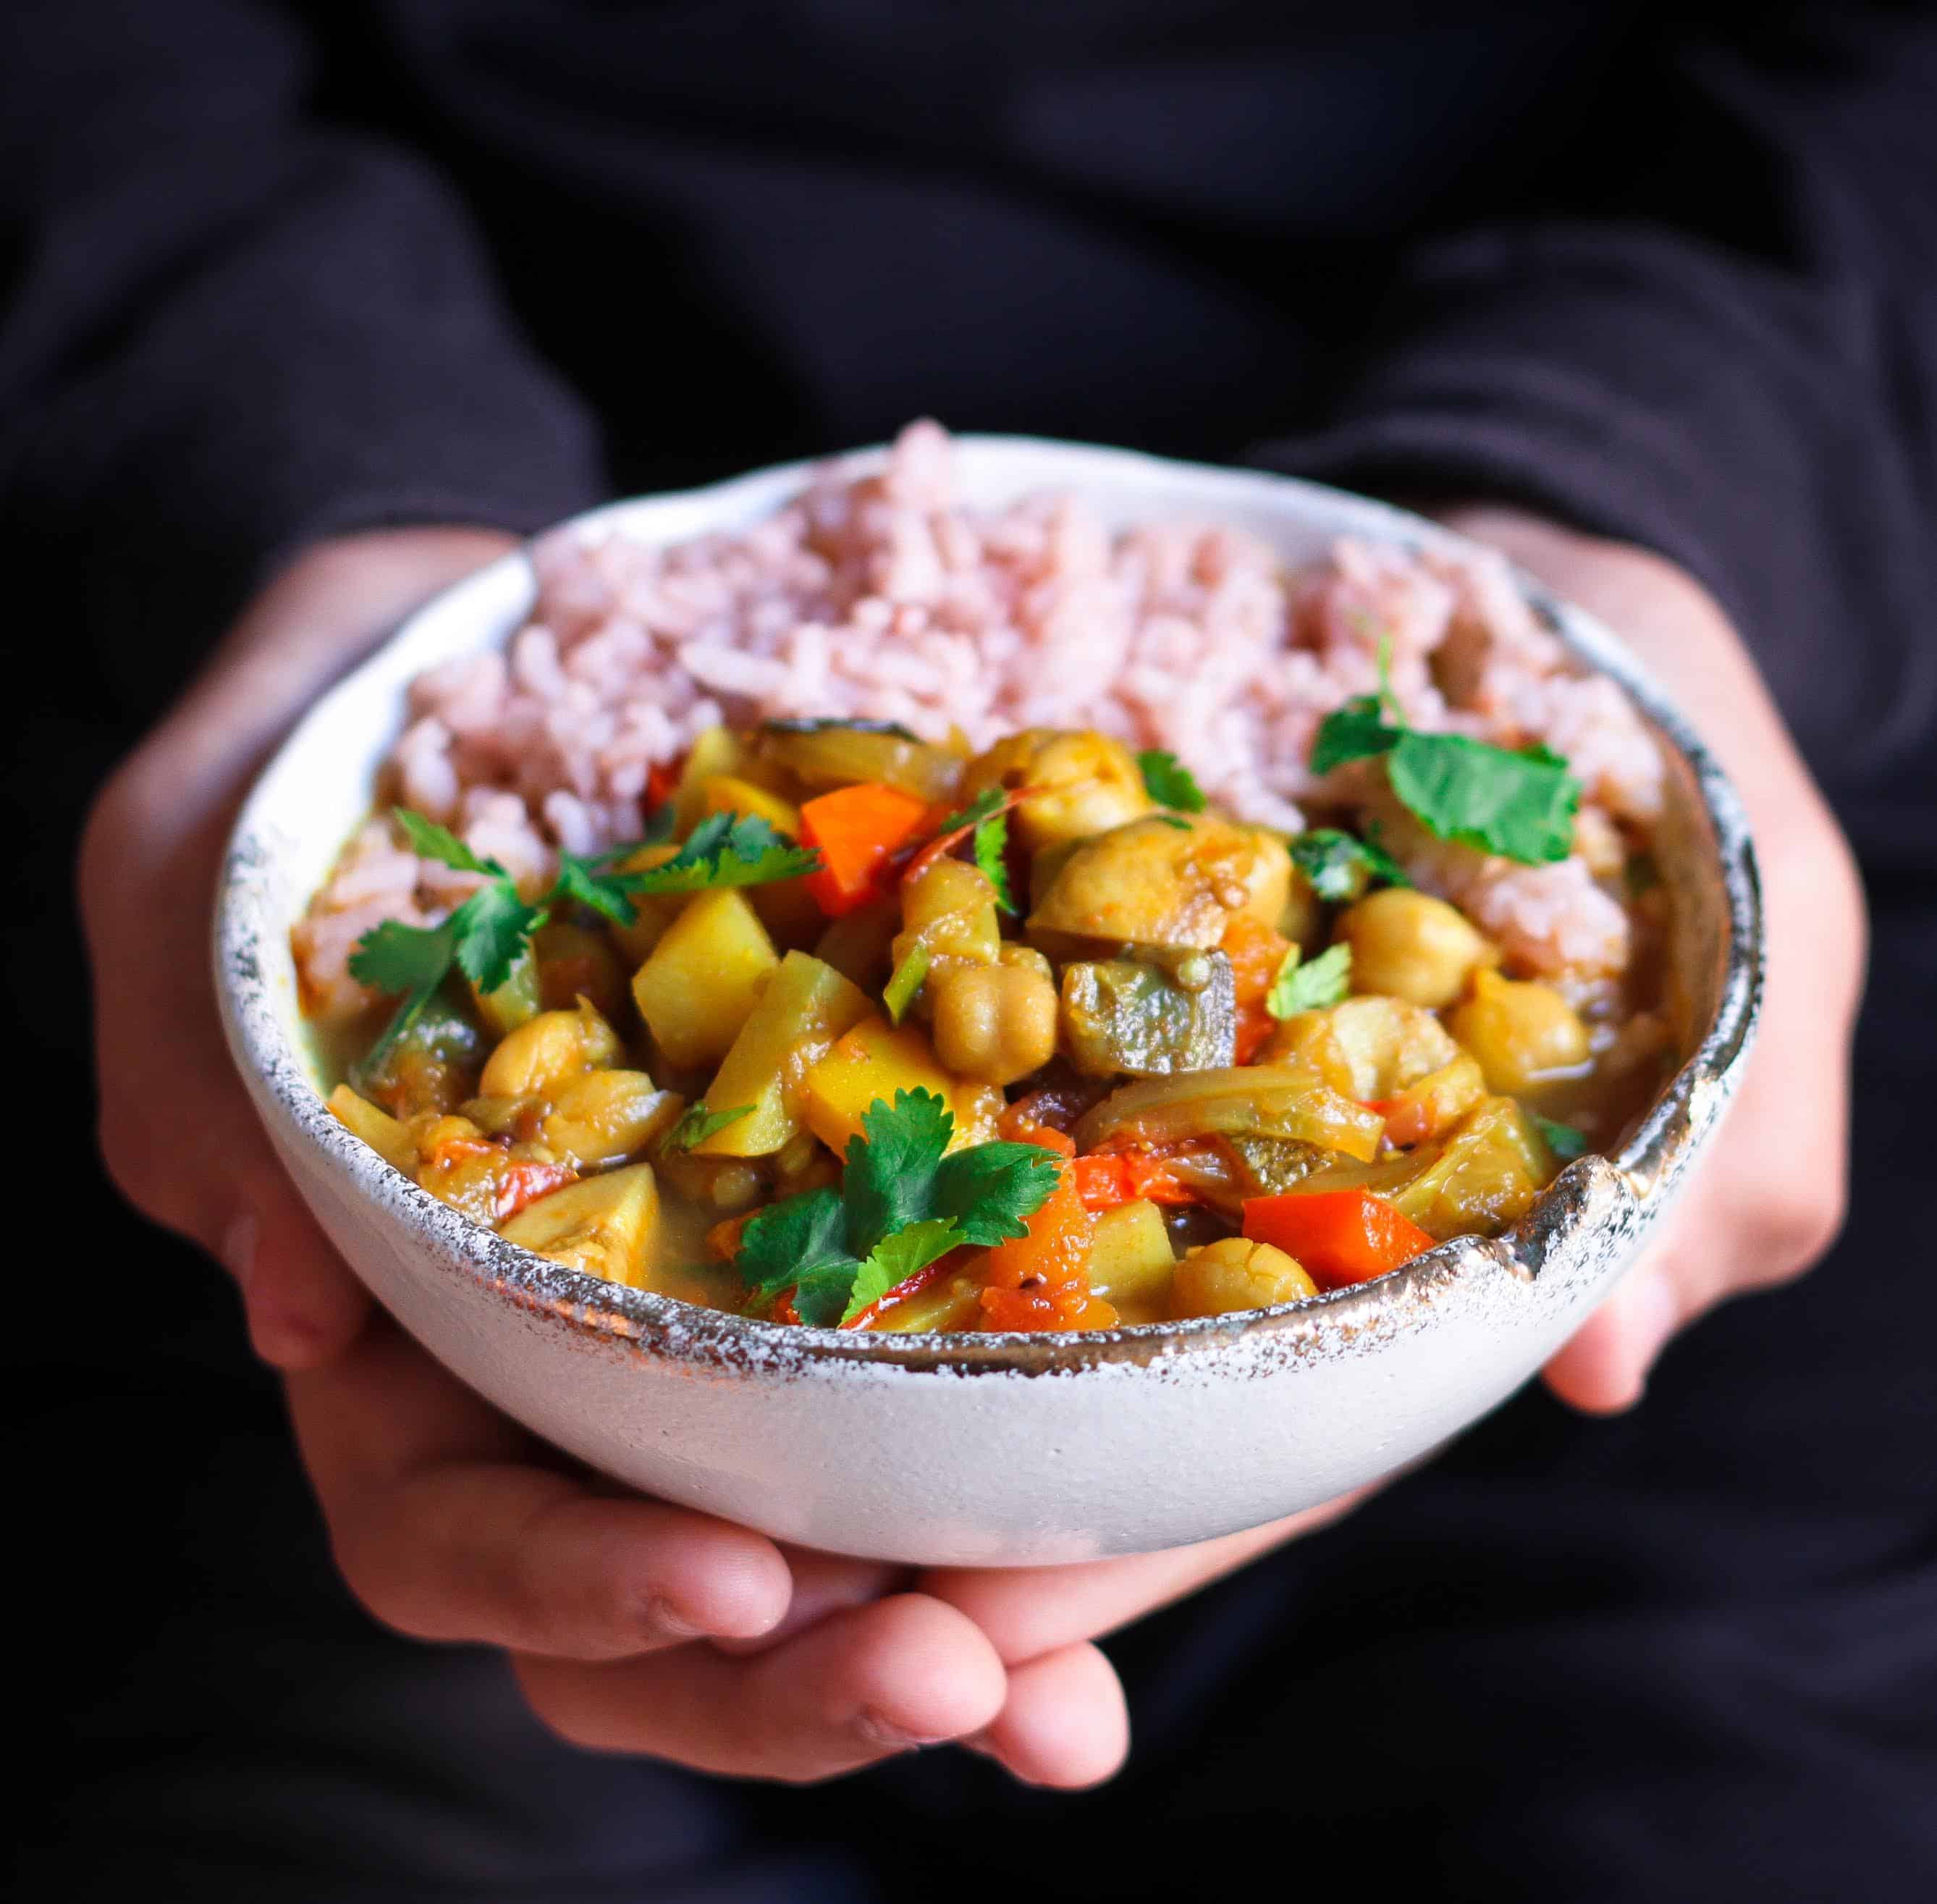 Moroccan Vegetable Stew vegan, colourful, easy recipe, vegetables, chickpeas, protein